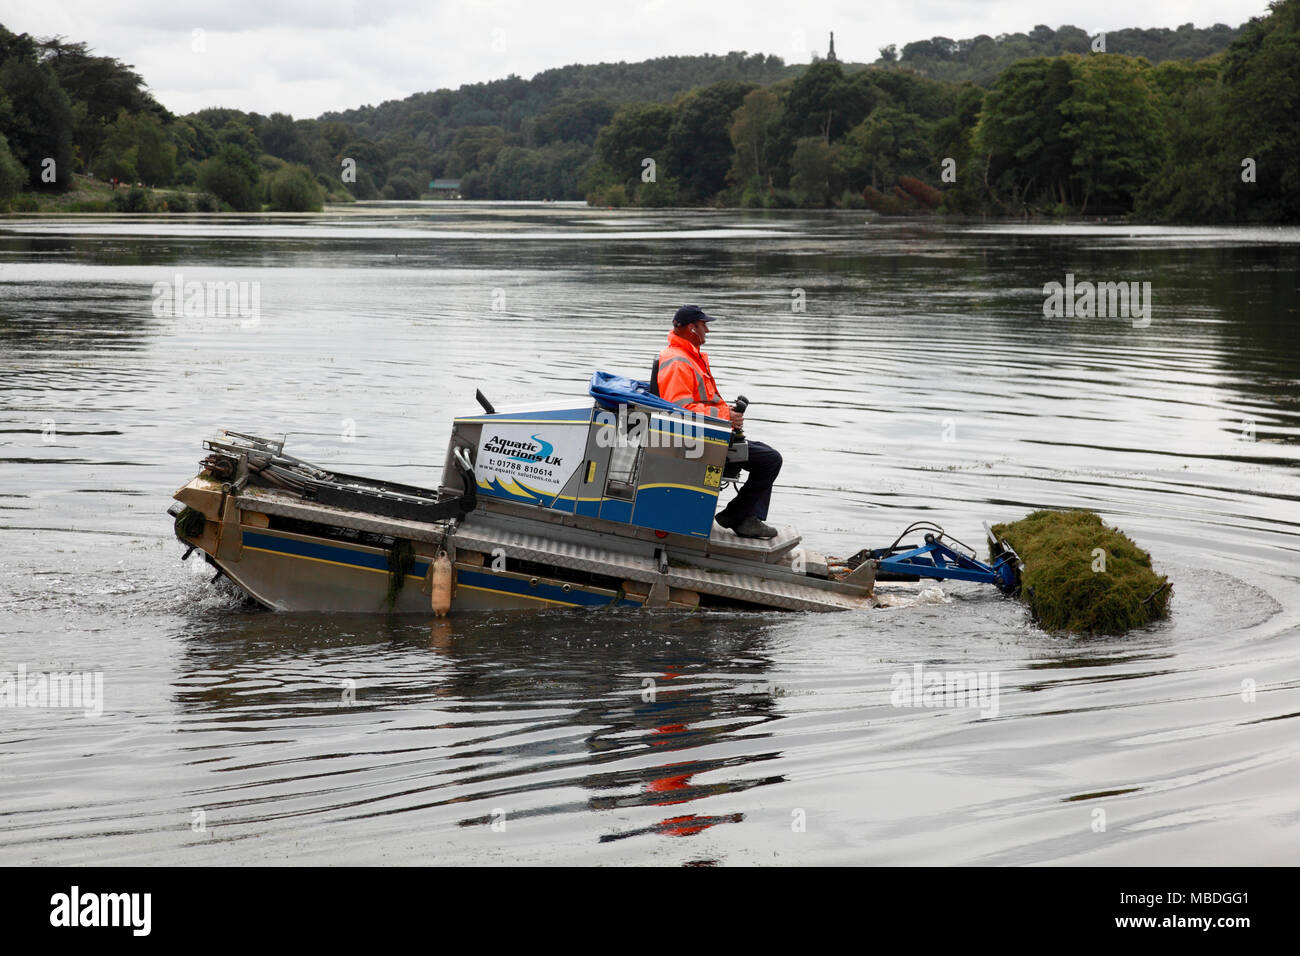 A 3 Truxor amphibious machine for collecting and gathering aquatic weeds in operation at Trentham Gardens, Stoke on Trent Stock Photo